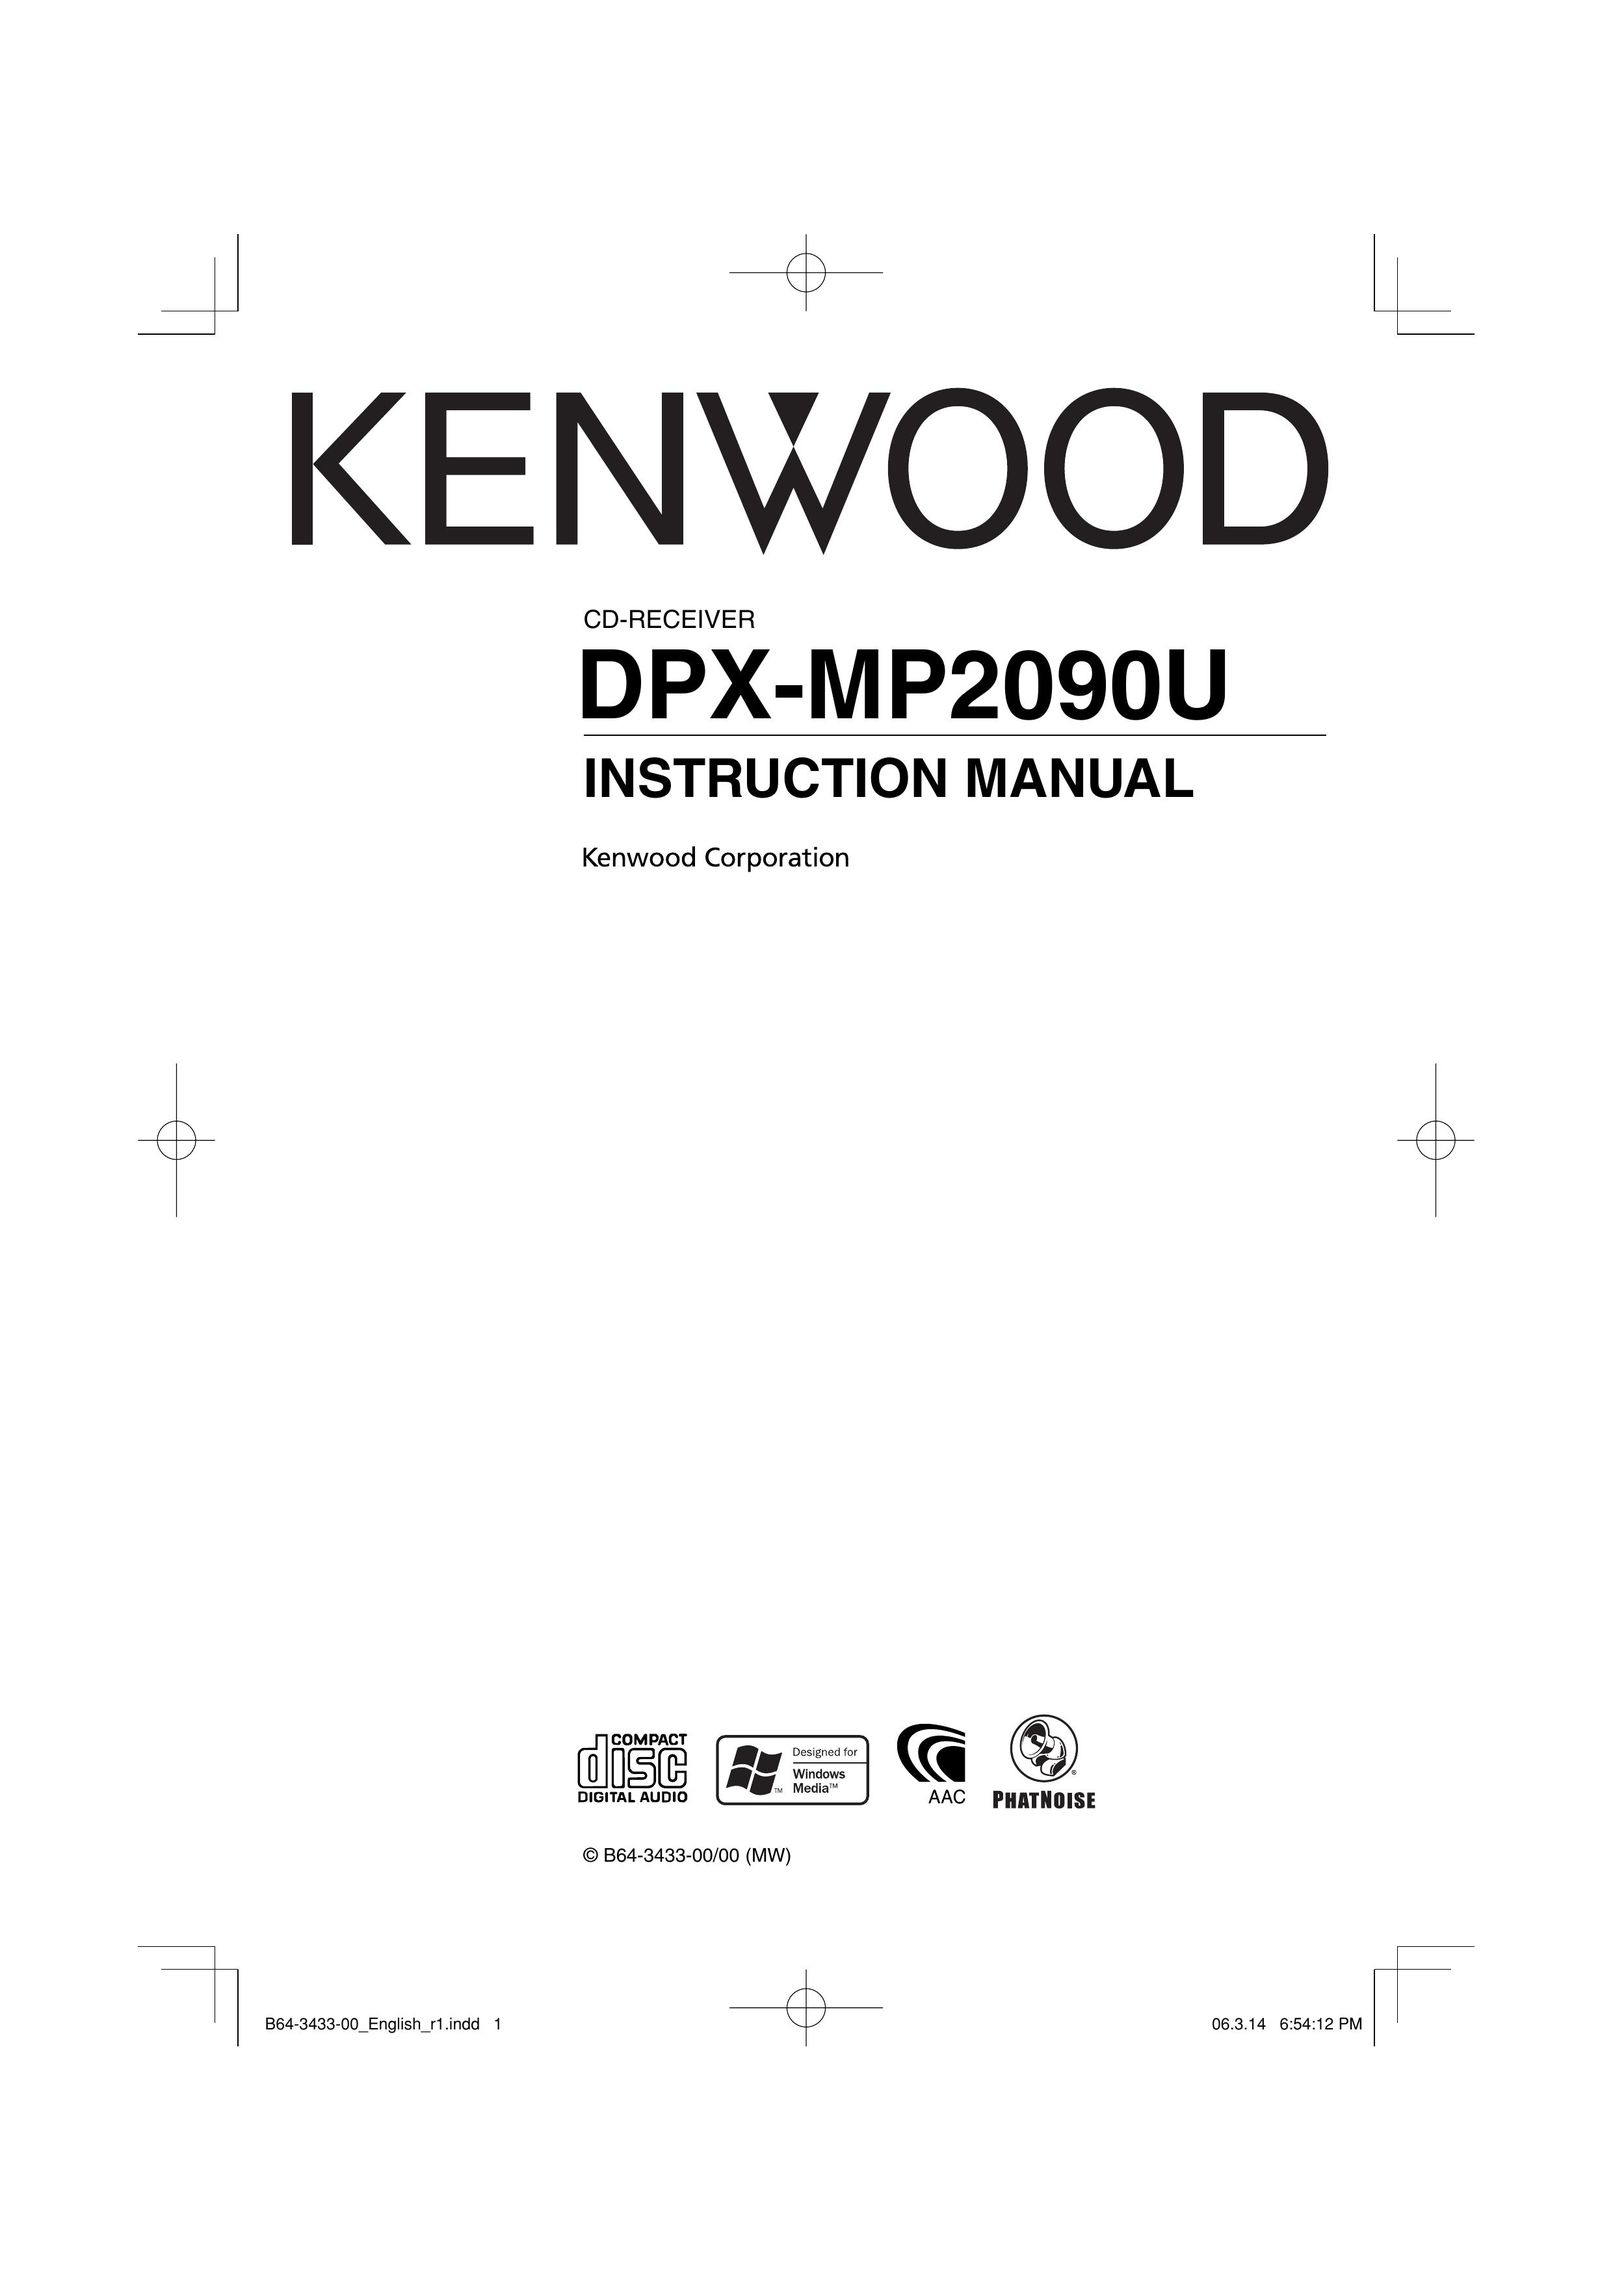 Kenwood DPX-MP2090U Car Stereo System User Manual